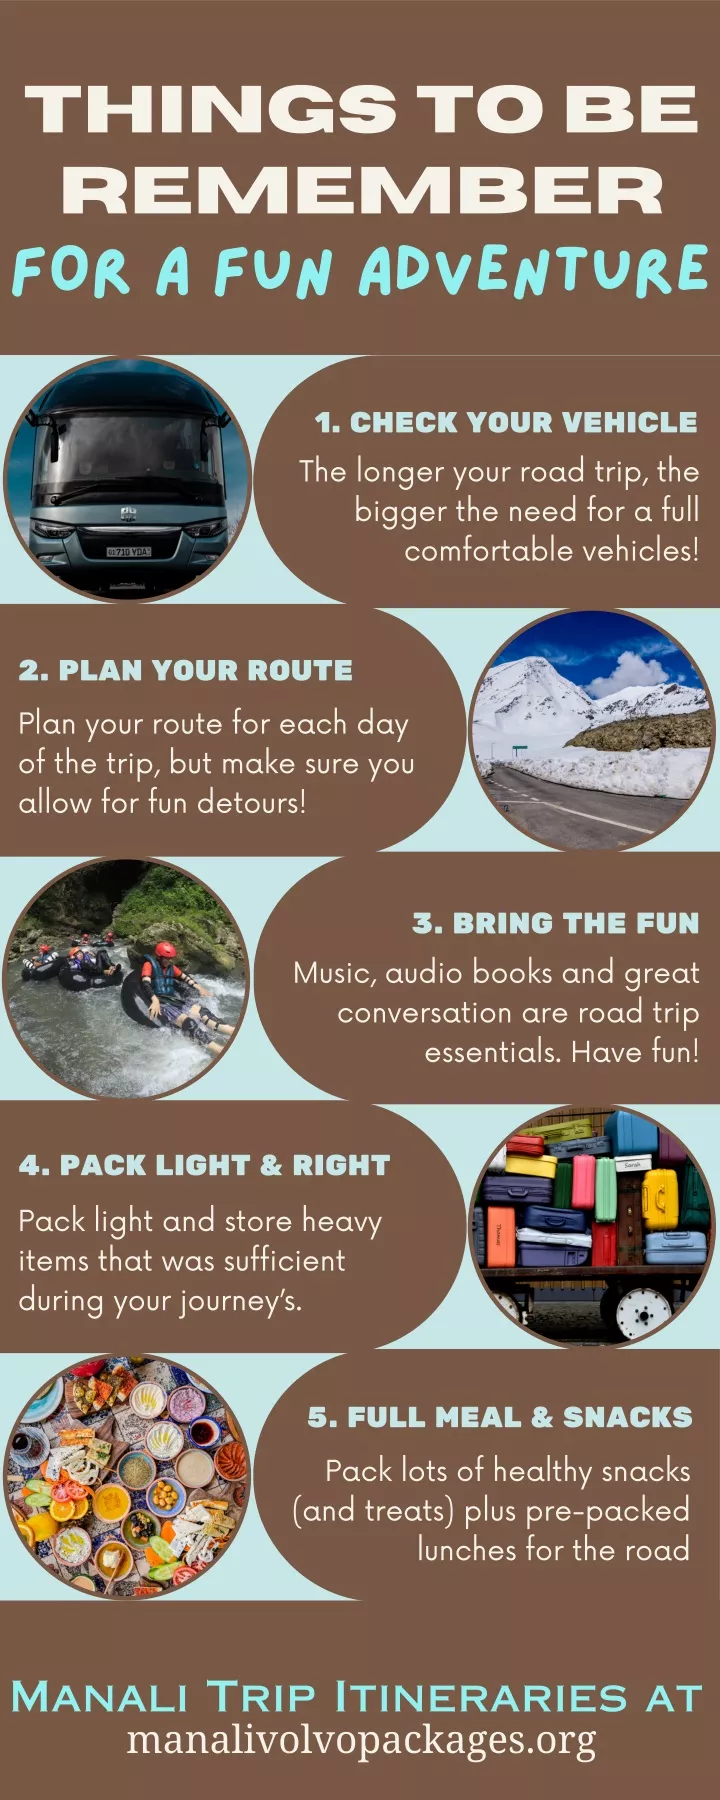 things to be remember for a fun adventure